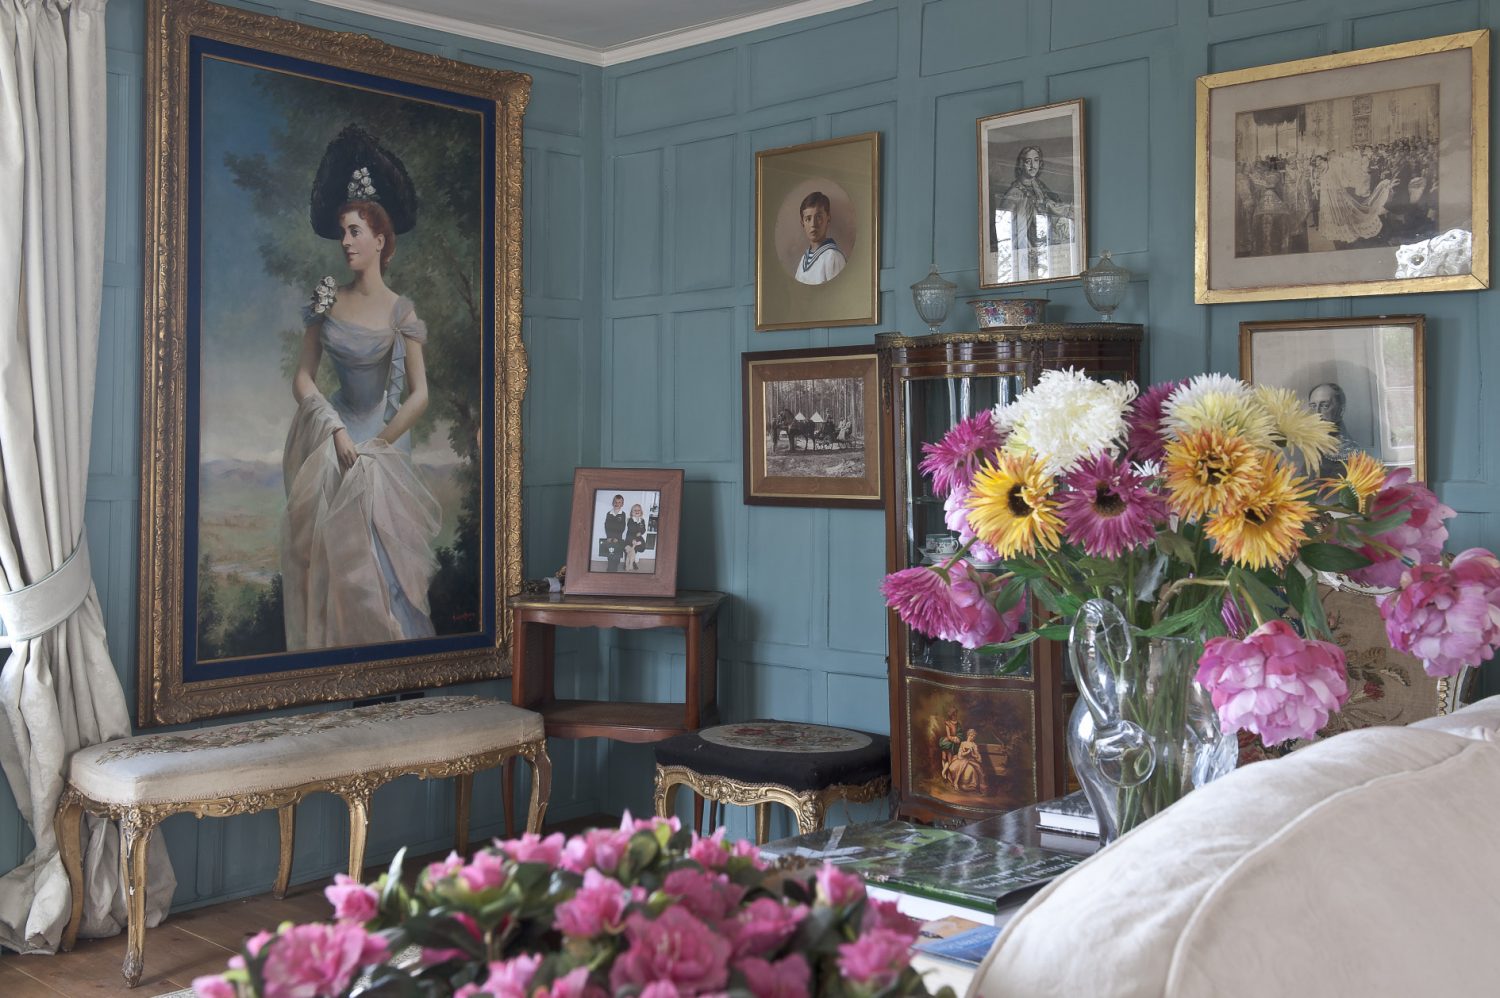 The panelled walls of the drawing room have been painted ballroom blue which perfectly offsets the gilt framed portraits around the room